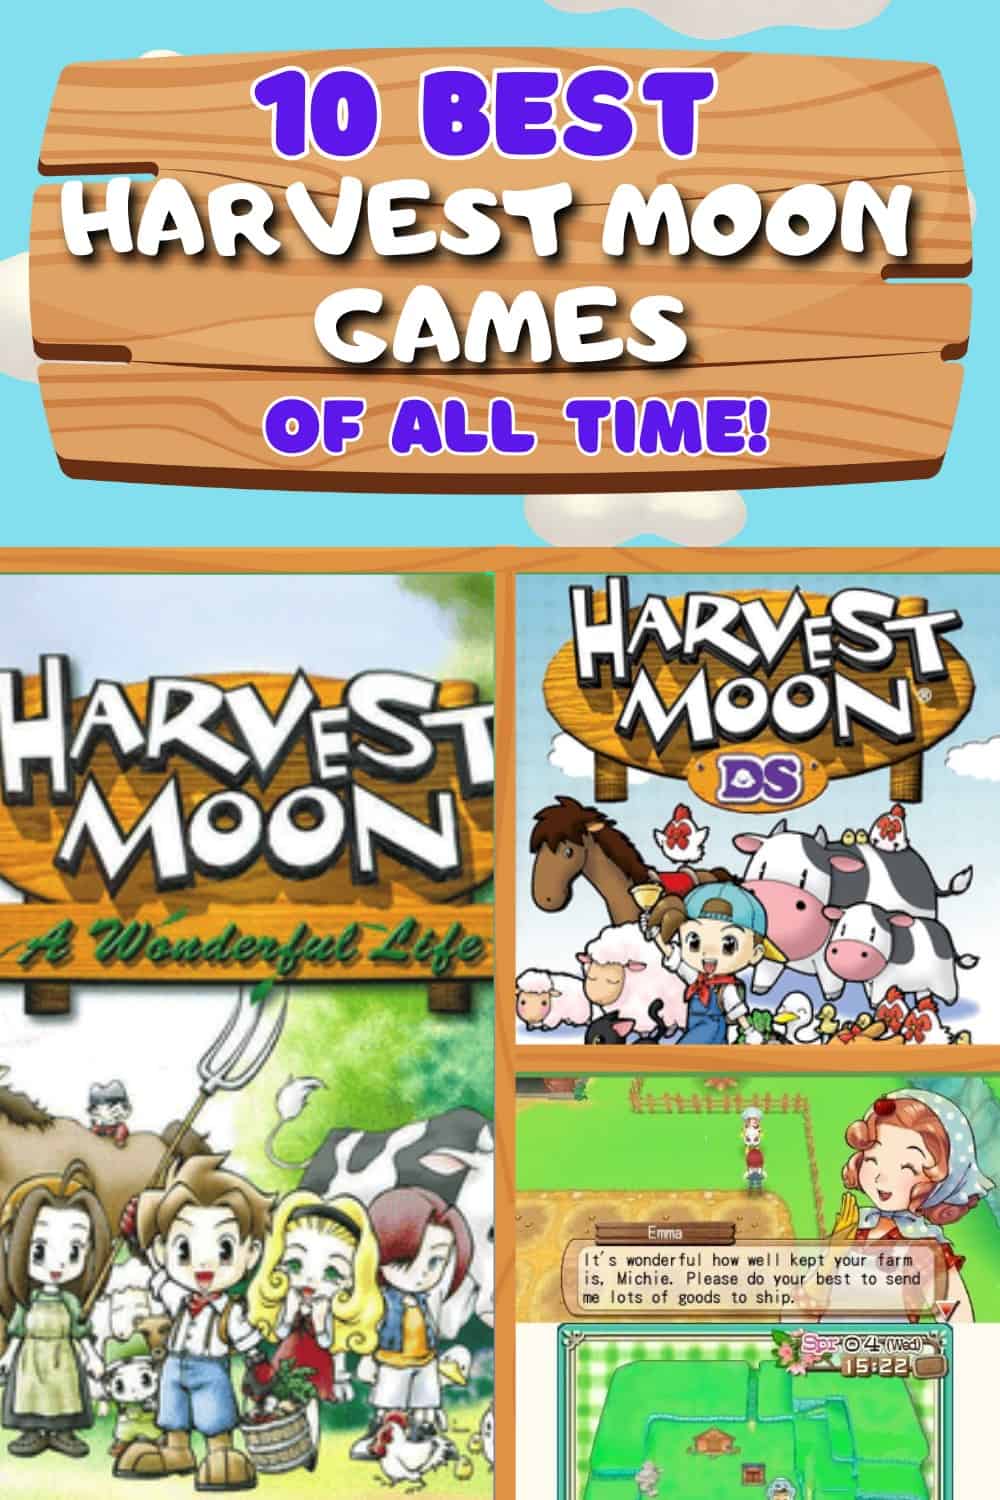 What is the best Harvest Moon game?